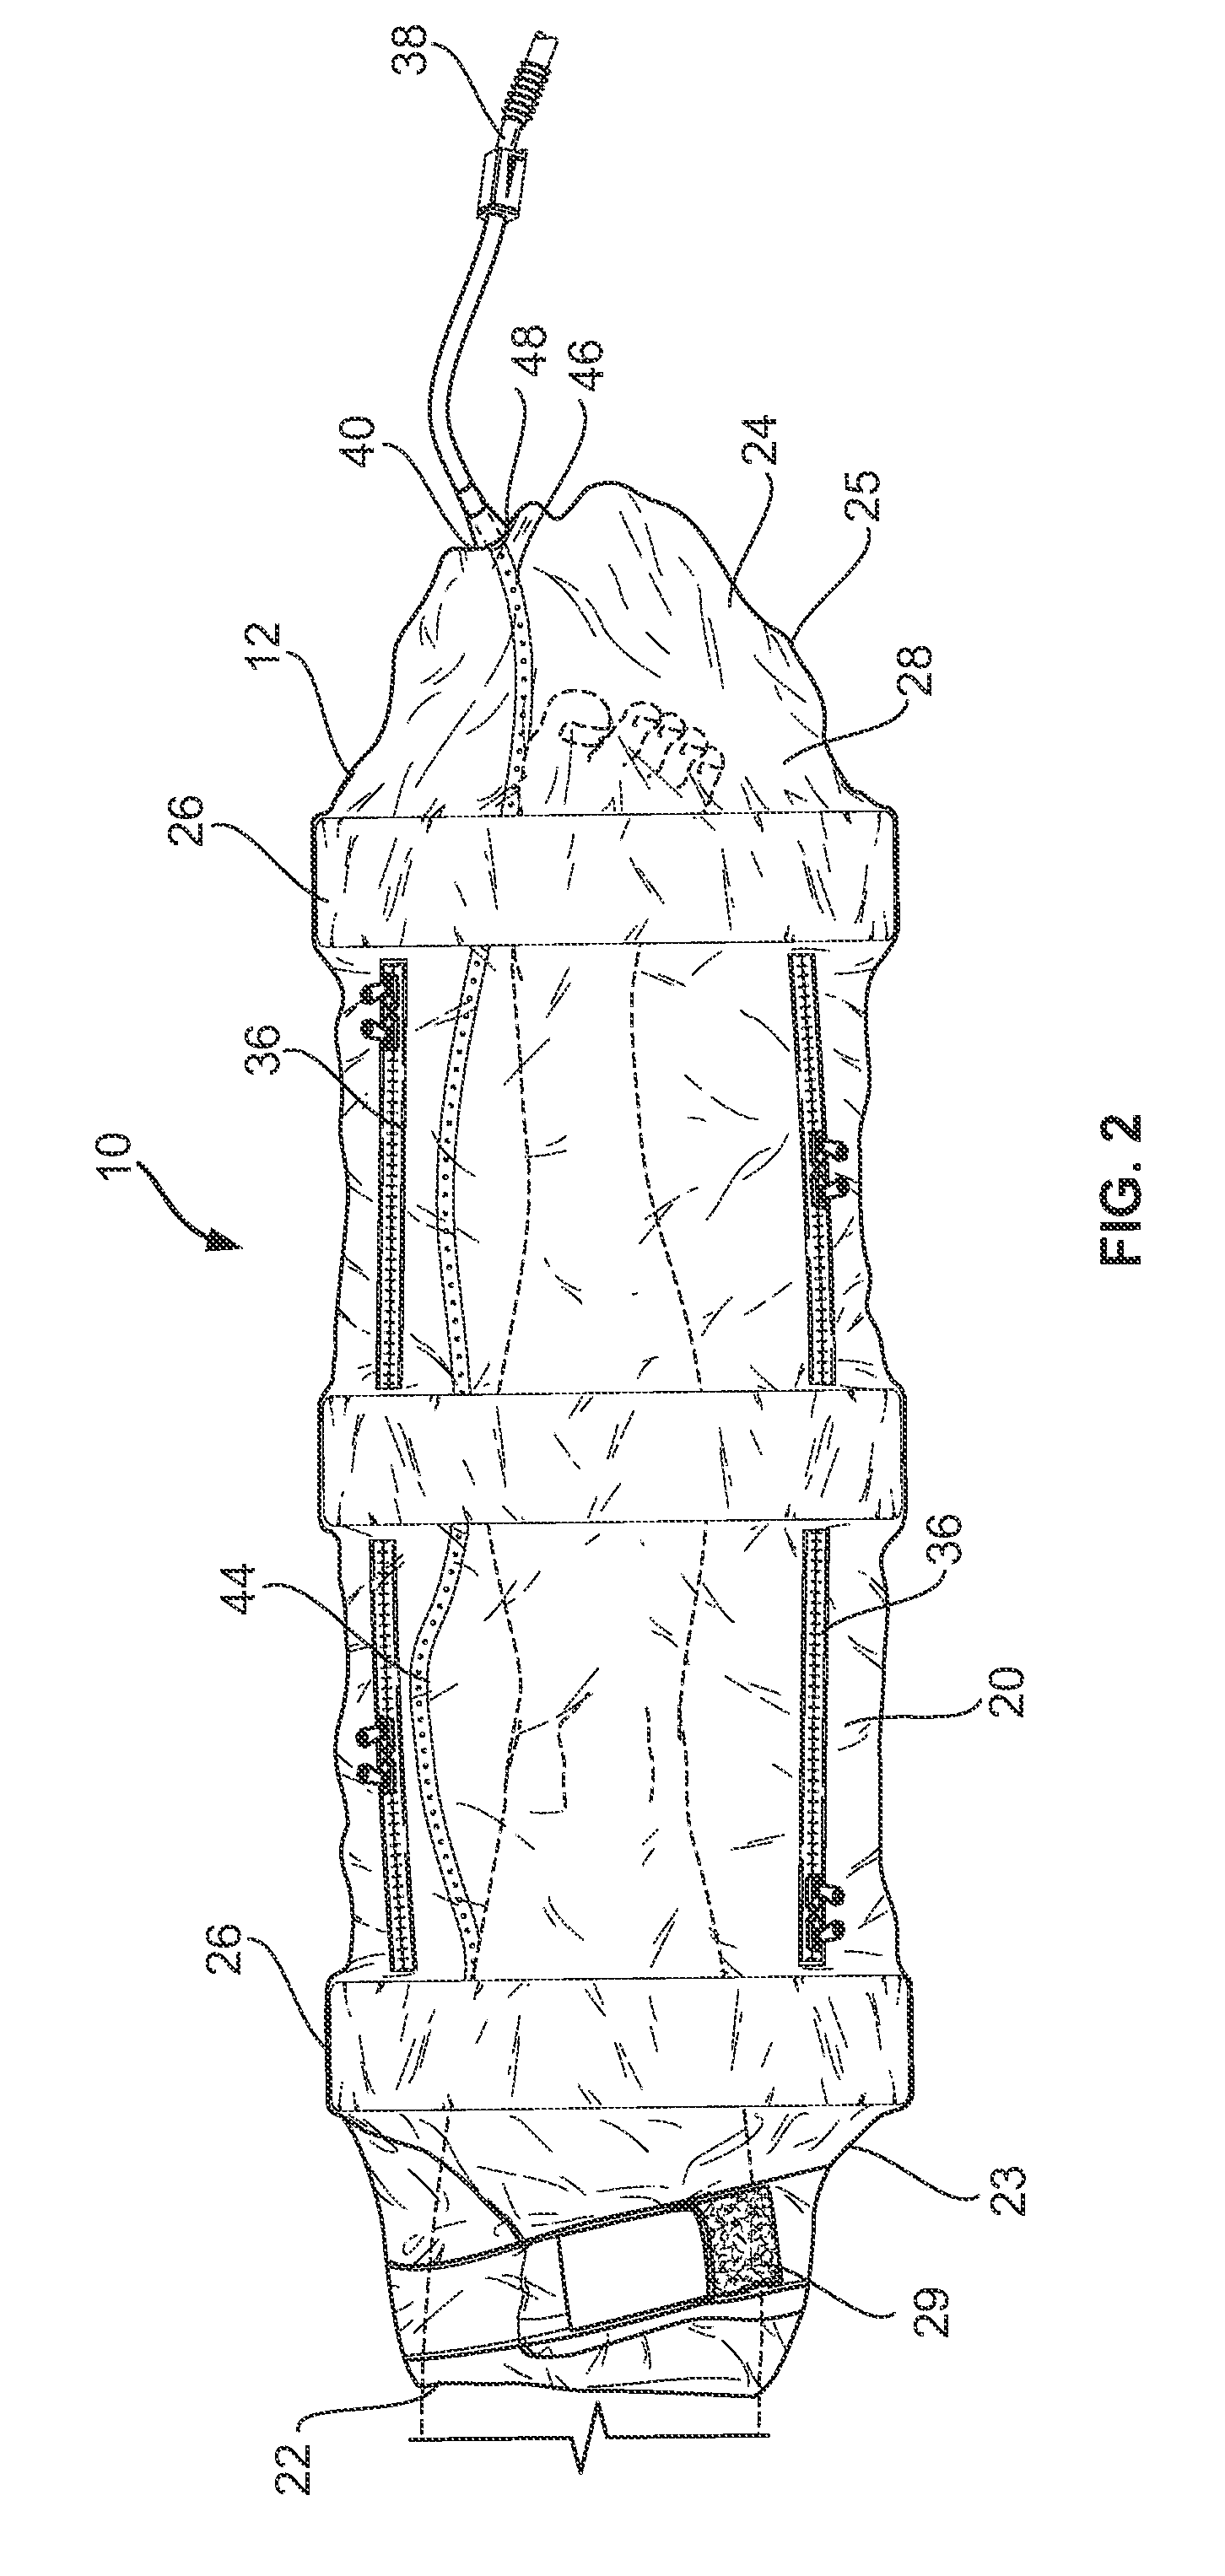 Collapsible fluid containment device with semi-rigid support members